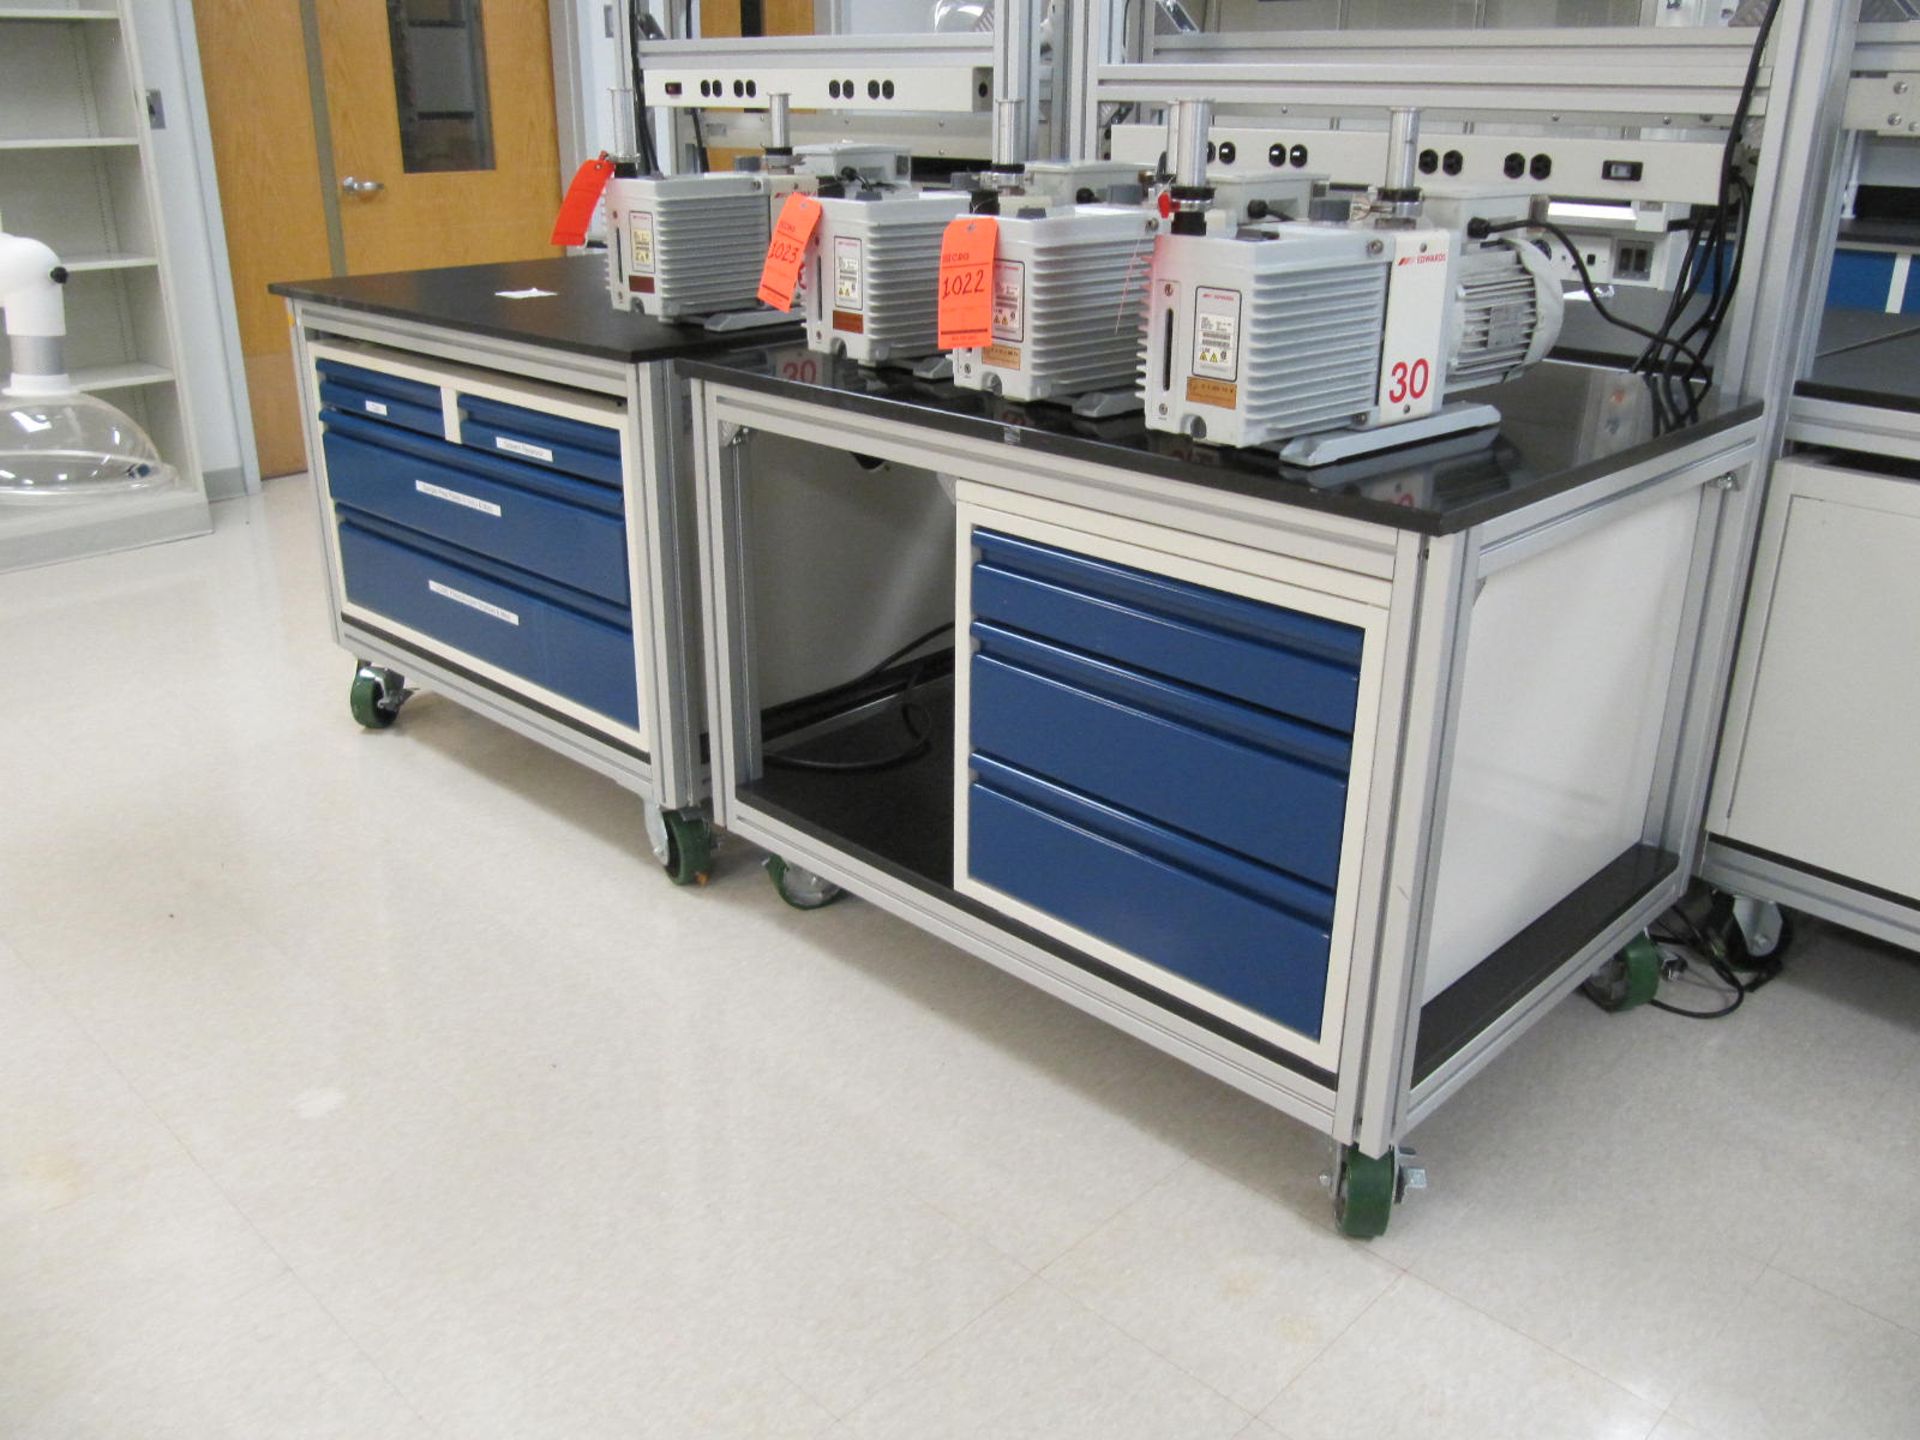 Lot of (5) mobile lab counters, approximate 48" X 36", with drawers and power distribution panels, - Image 2 of 2